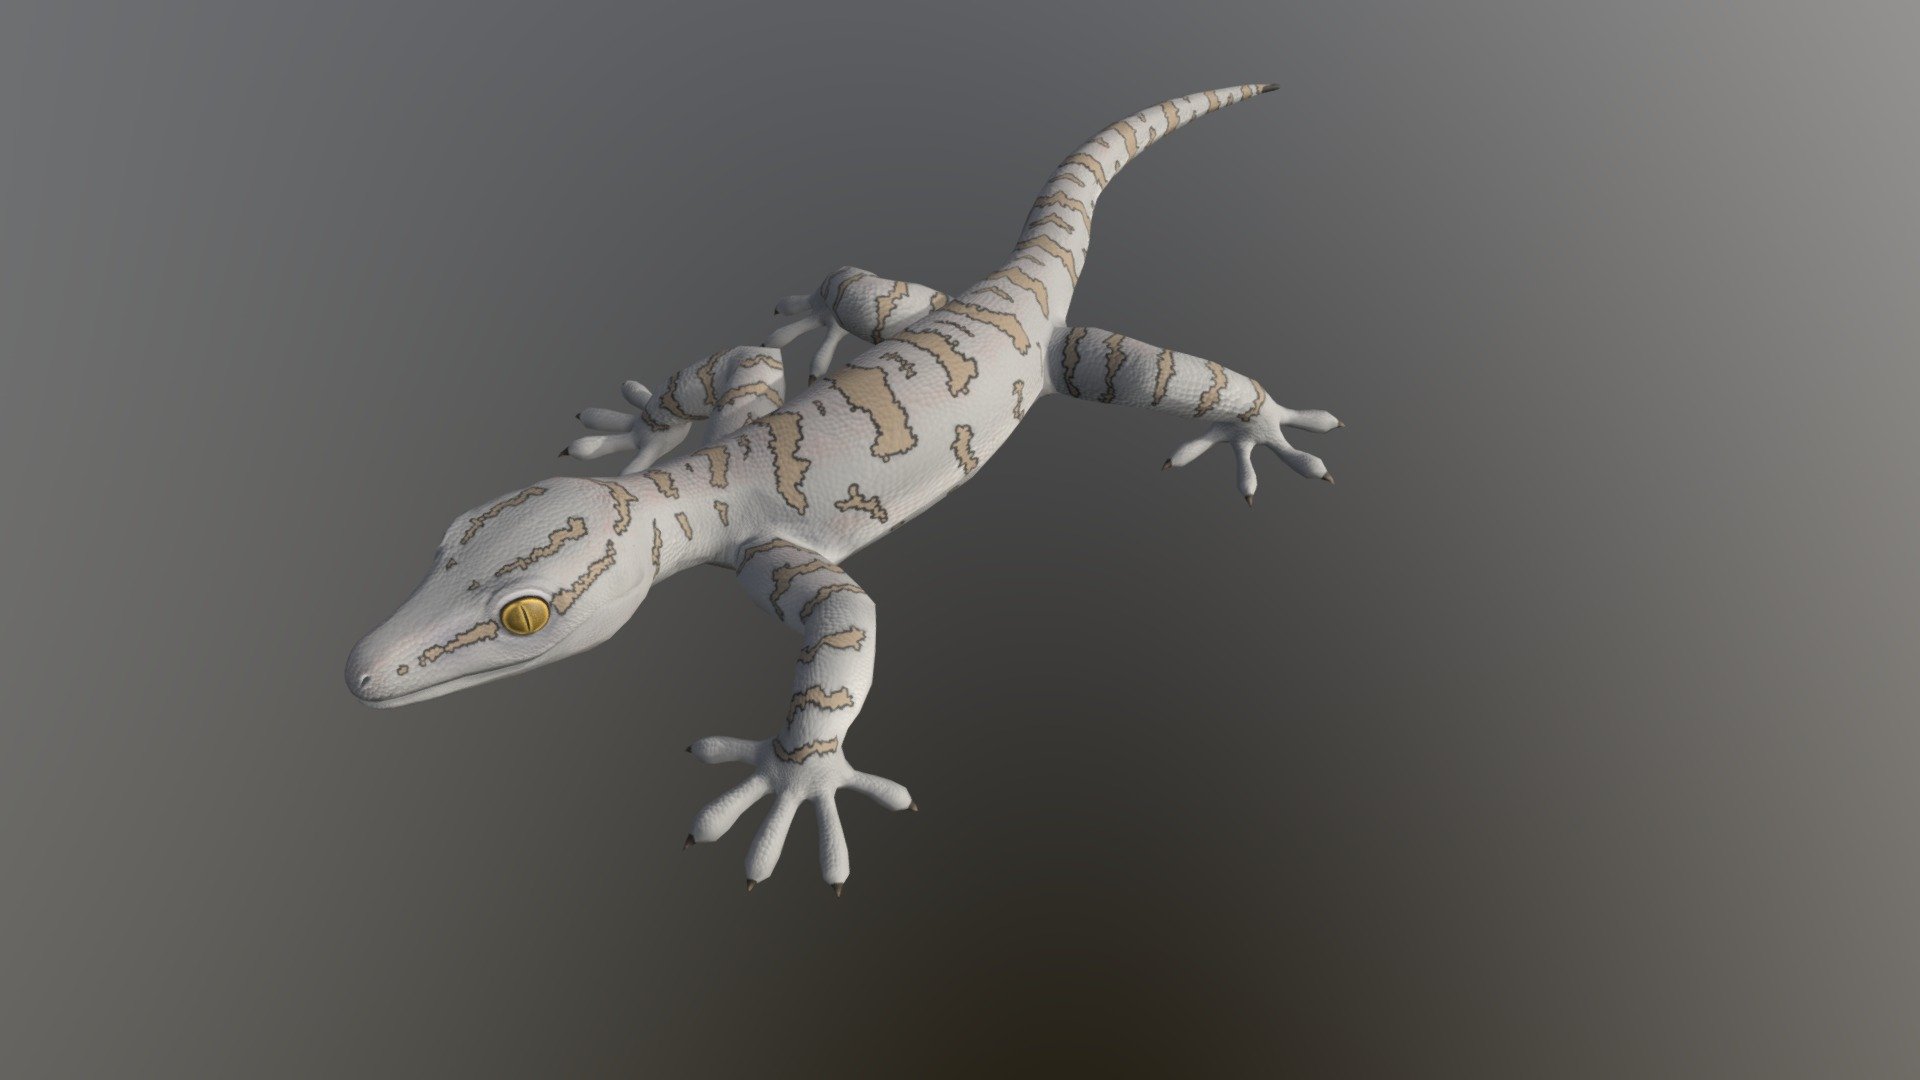 With its sensual movements, you'll be climbing walls

This model was sculpted in ZBrush, rigged and animated in Blender. It comes with 13 skins.

Texture Maps:




Diffuse Map 2048x2048

Normal Map 2048x2048

Roughness Map 2048x2048

Animations:




Idle 1

Idle 2

Walk

Run

Die

The additional file comes with .ztl, .obj, .blend, .fbx files and all the textures.

This model was tested in Unreal Engine 4 as shown in the pictures above

This model was created in a way that it is easy to make changes at your wish.

Got any question or suggestion? Send us a message or leave a coment 3d model